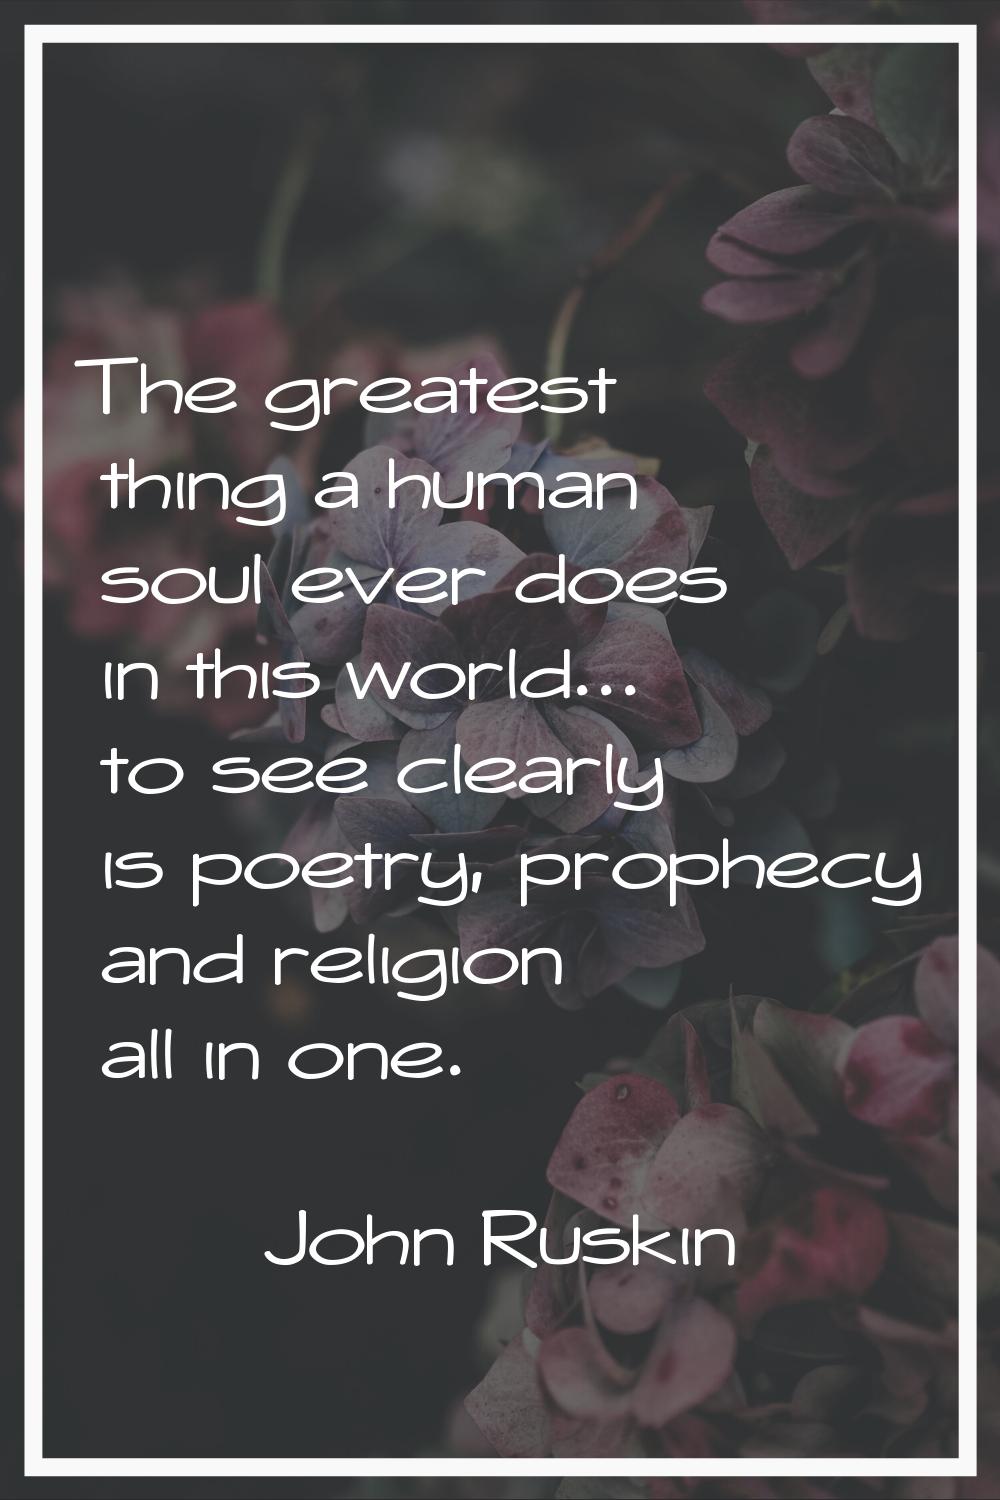 The greatest thing a human soul ever does in this world... to see clearly is poetry, prophecy and r